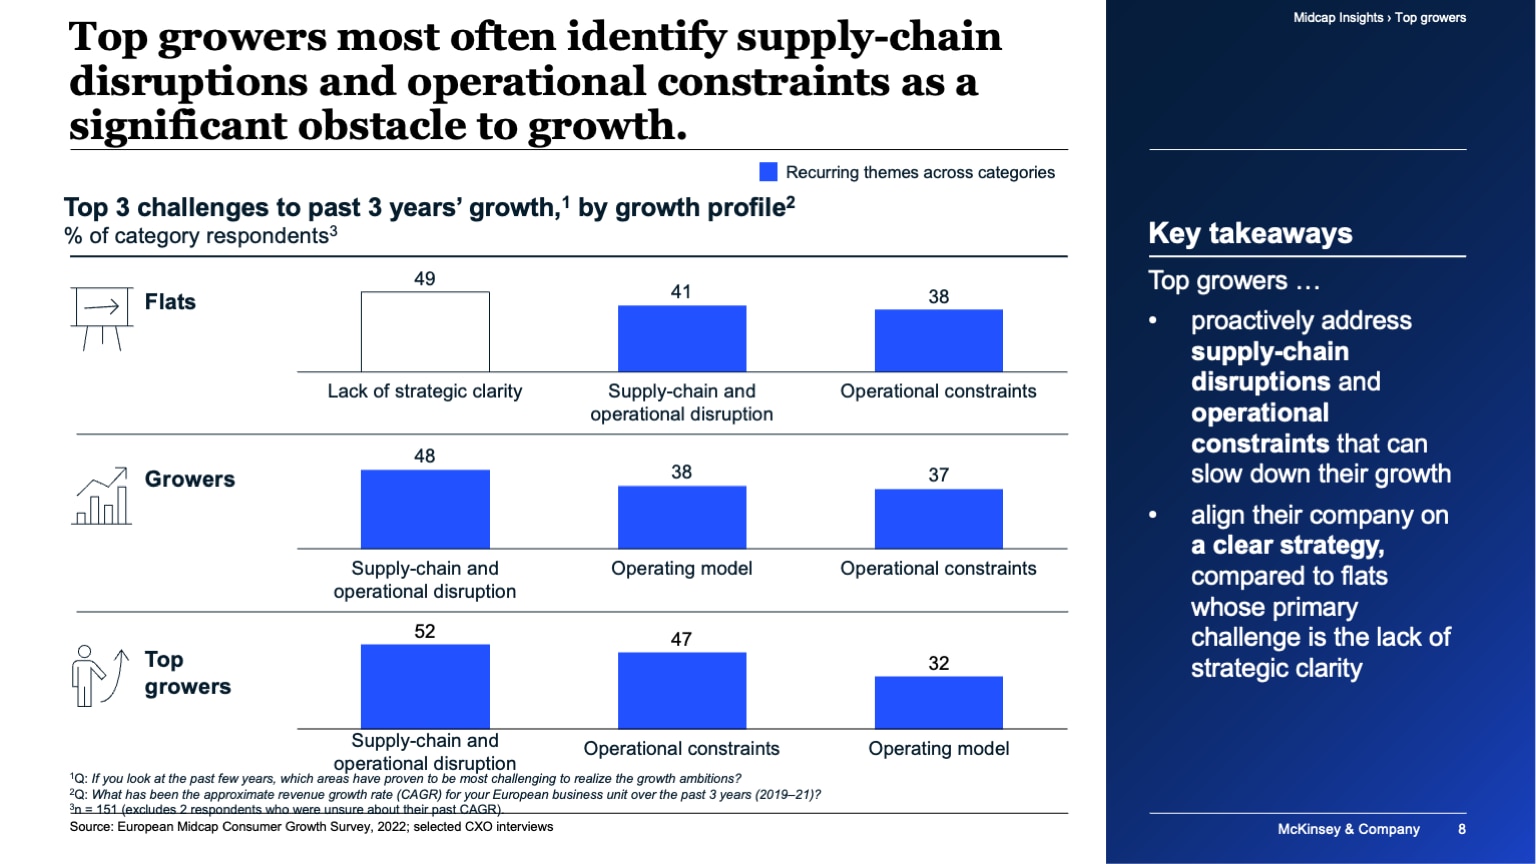 Top growers most often identify supply-chain disruptions and operational constraints as a significant obstacle to growth.